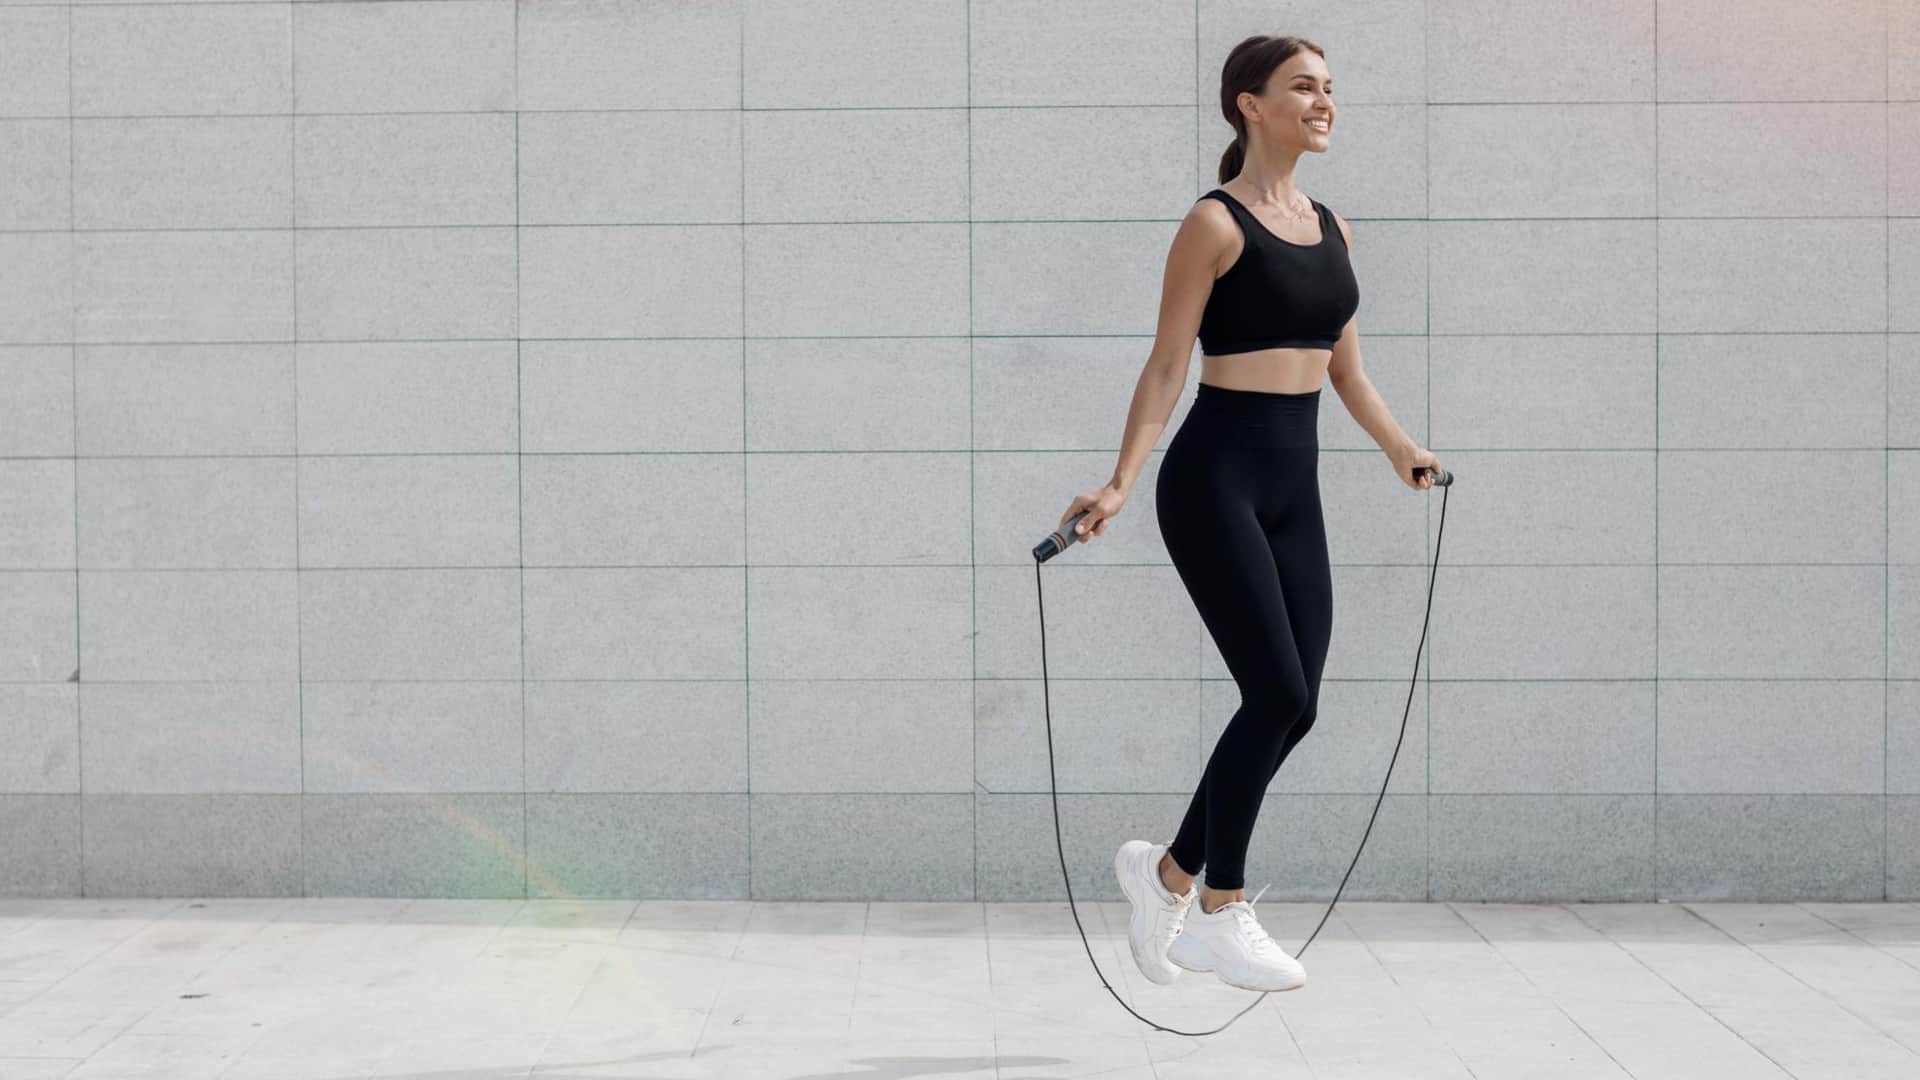 Jumping rope variations that make workout sessions enjoyable